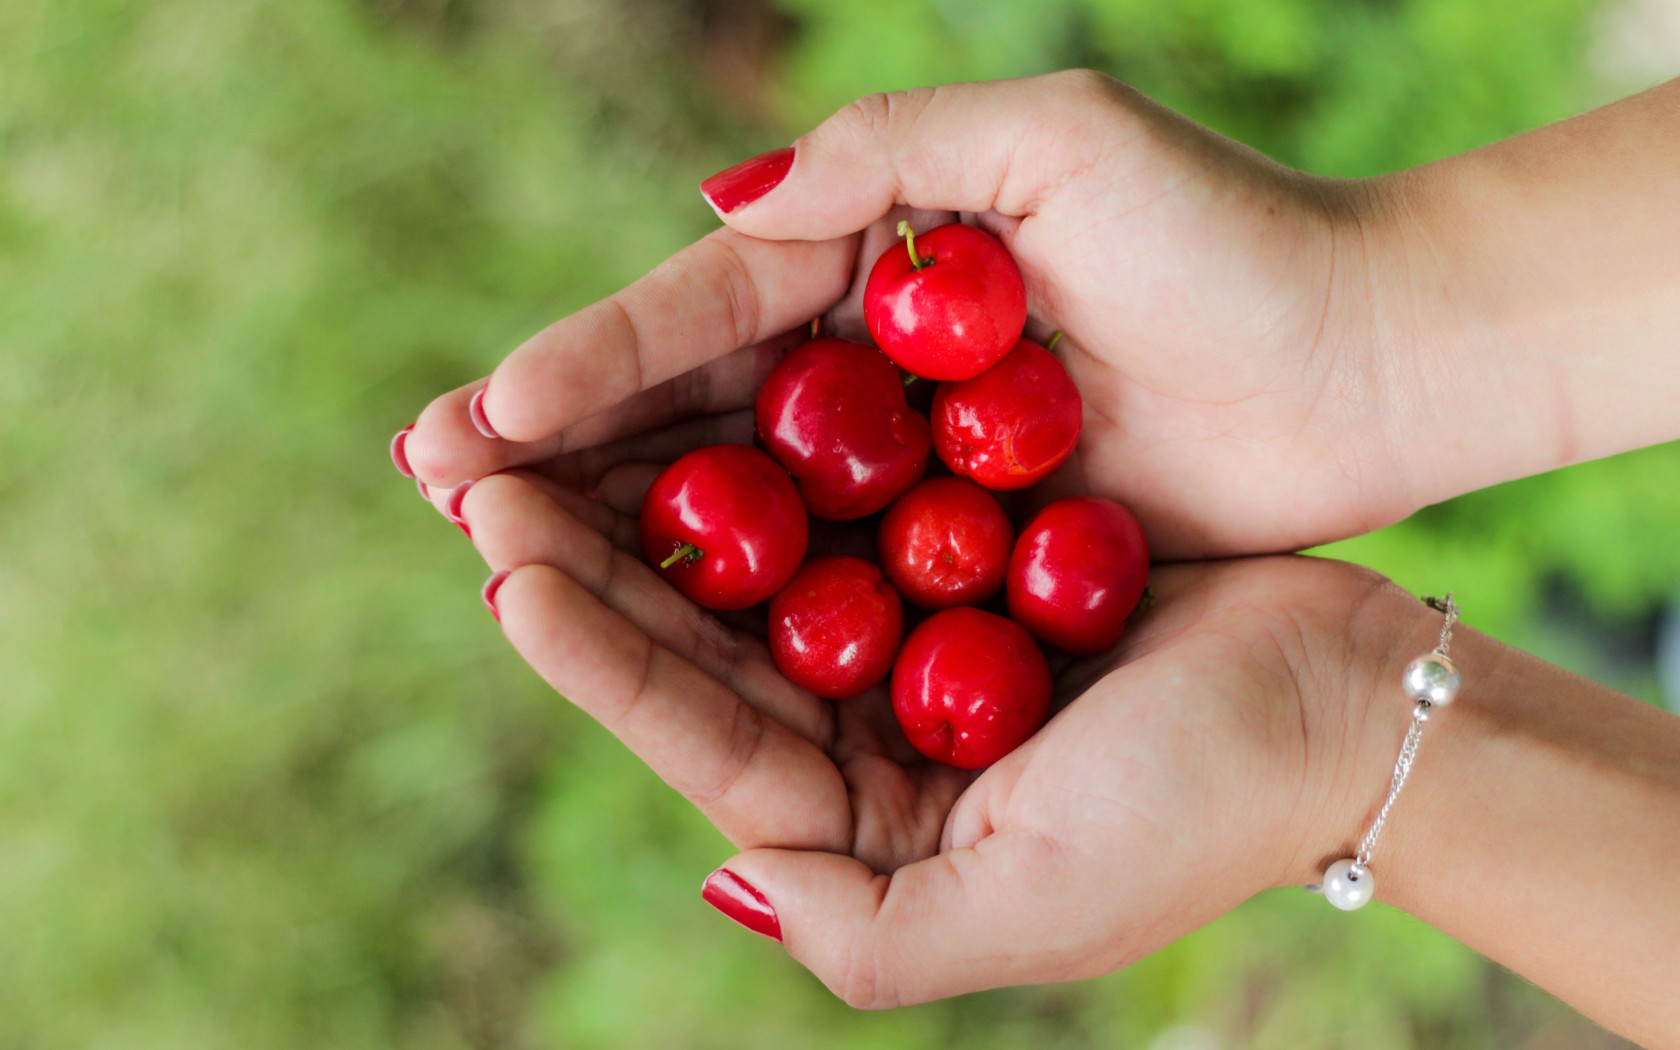 Hands filled with cherries wallpaper 1680x1050